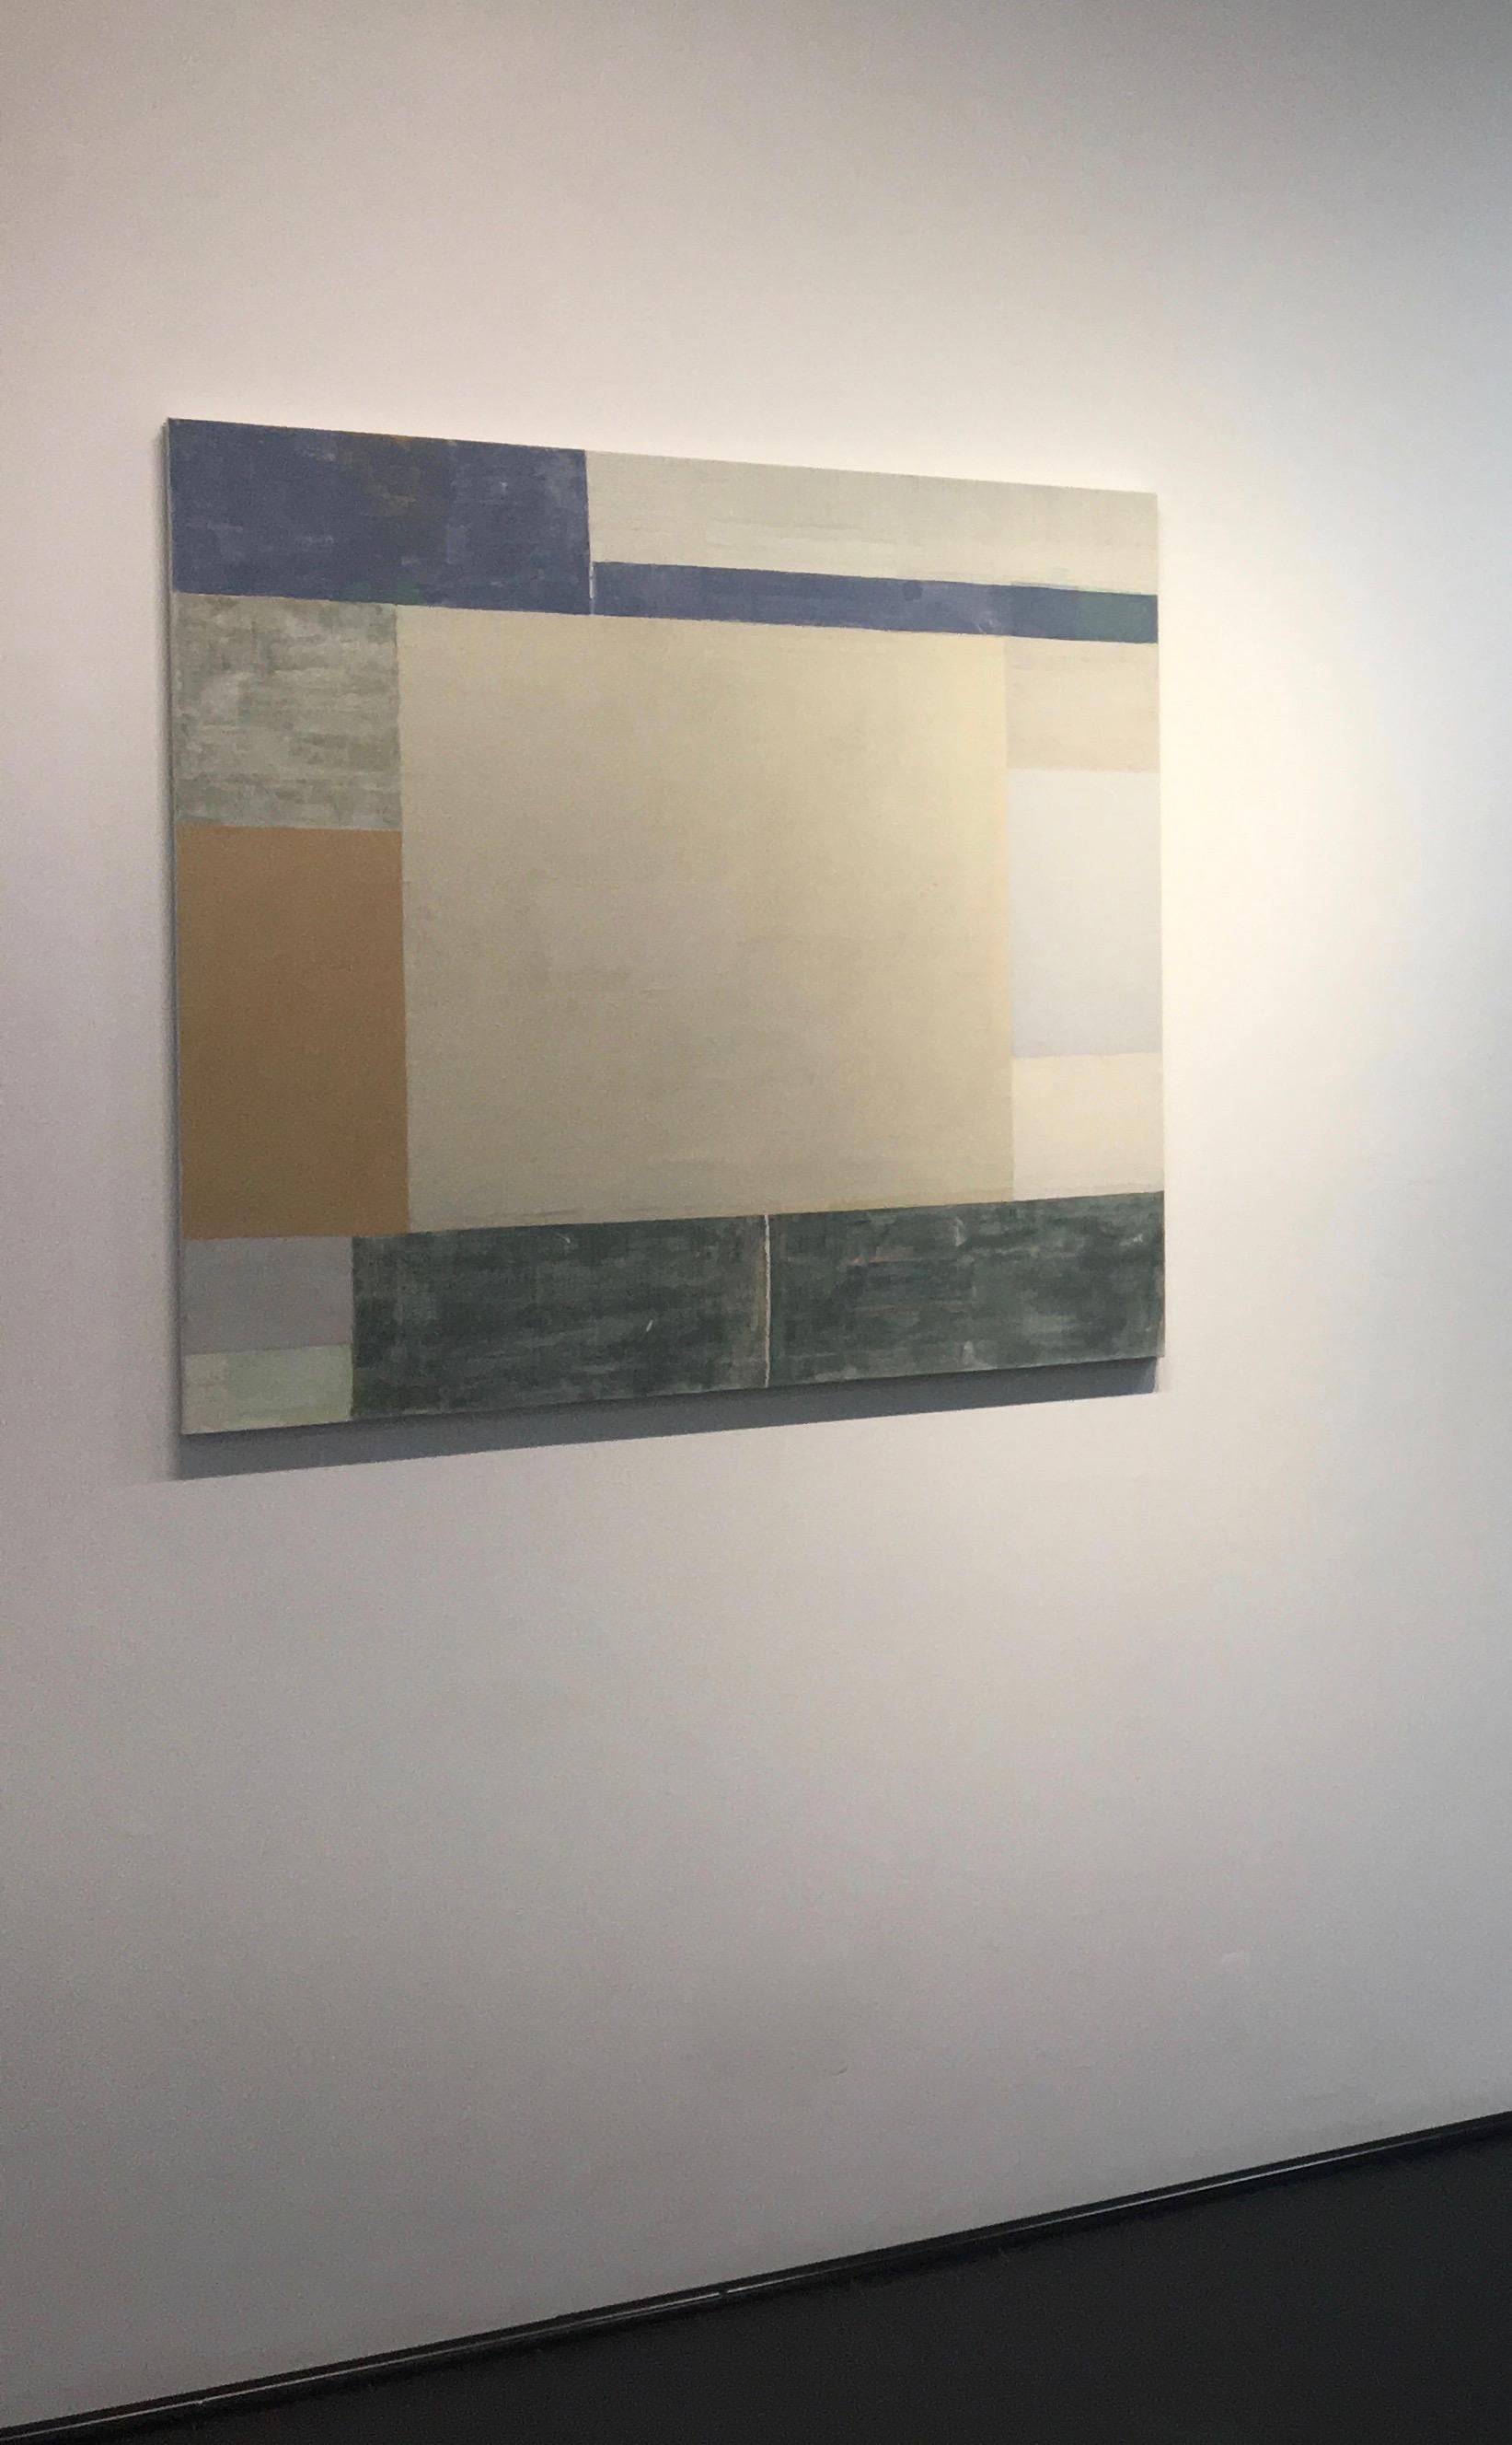 Stripes and blocks of color in soft gray blue, pale sage green, beige and golden brown are clean, precise and carefully ordered in this painting in flashe on canvas. Signed, dated and titled on verso.

Elizabeth Gourlay’s work is a meditation on